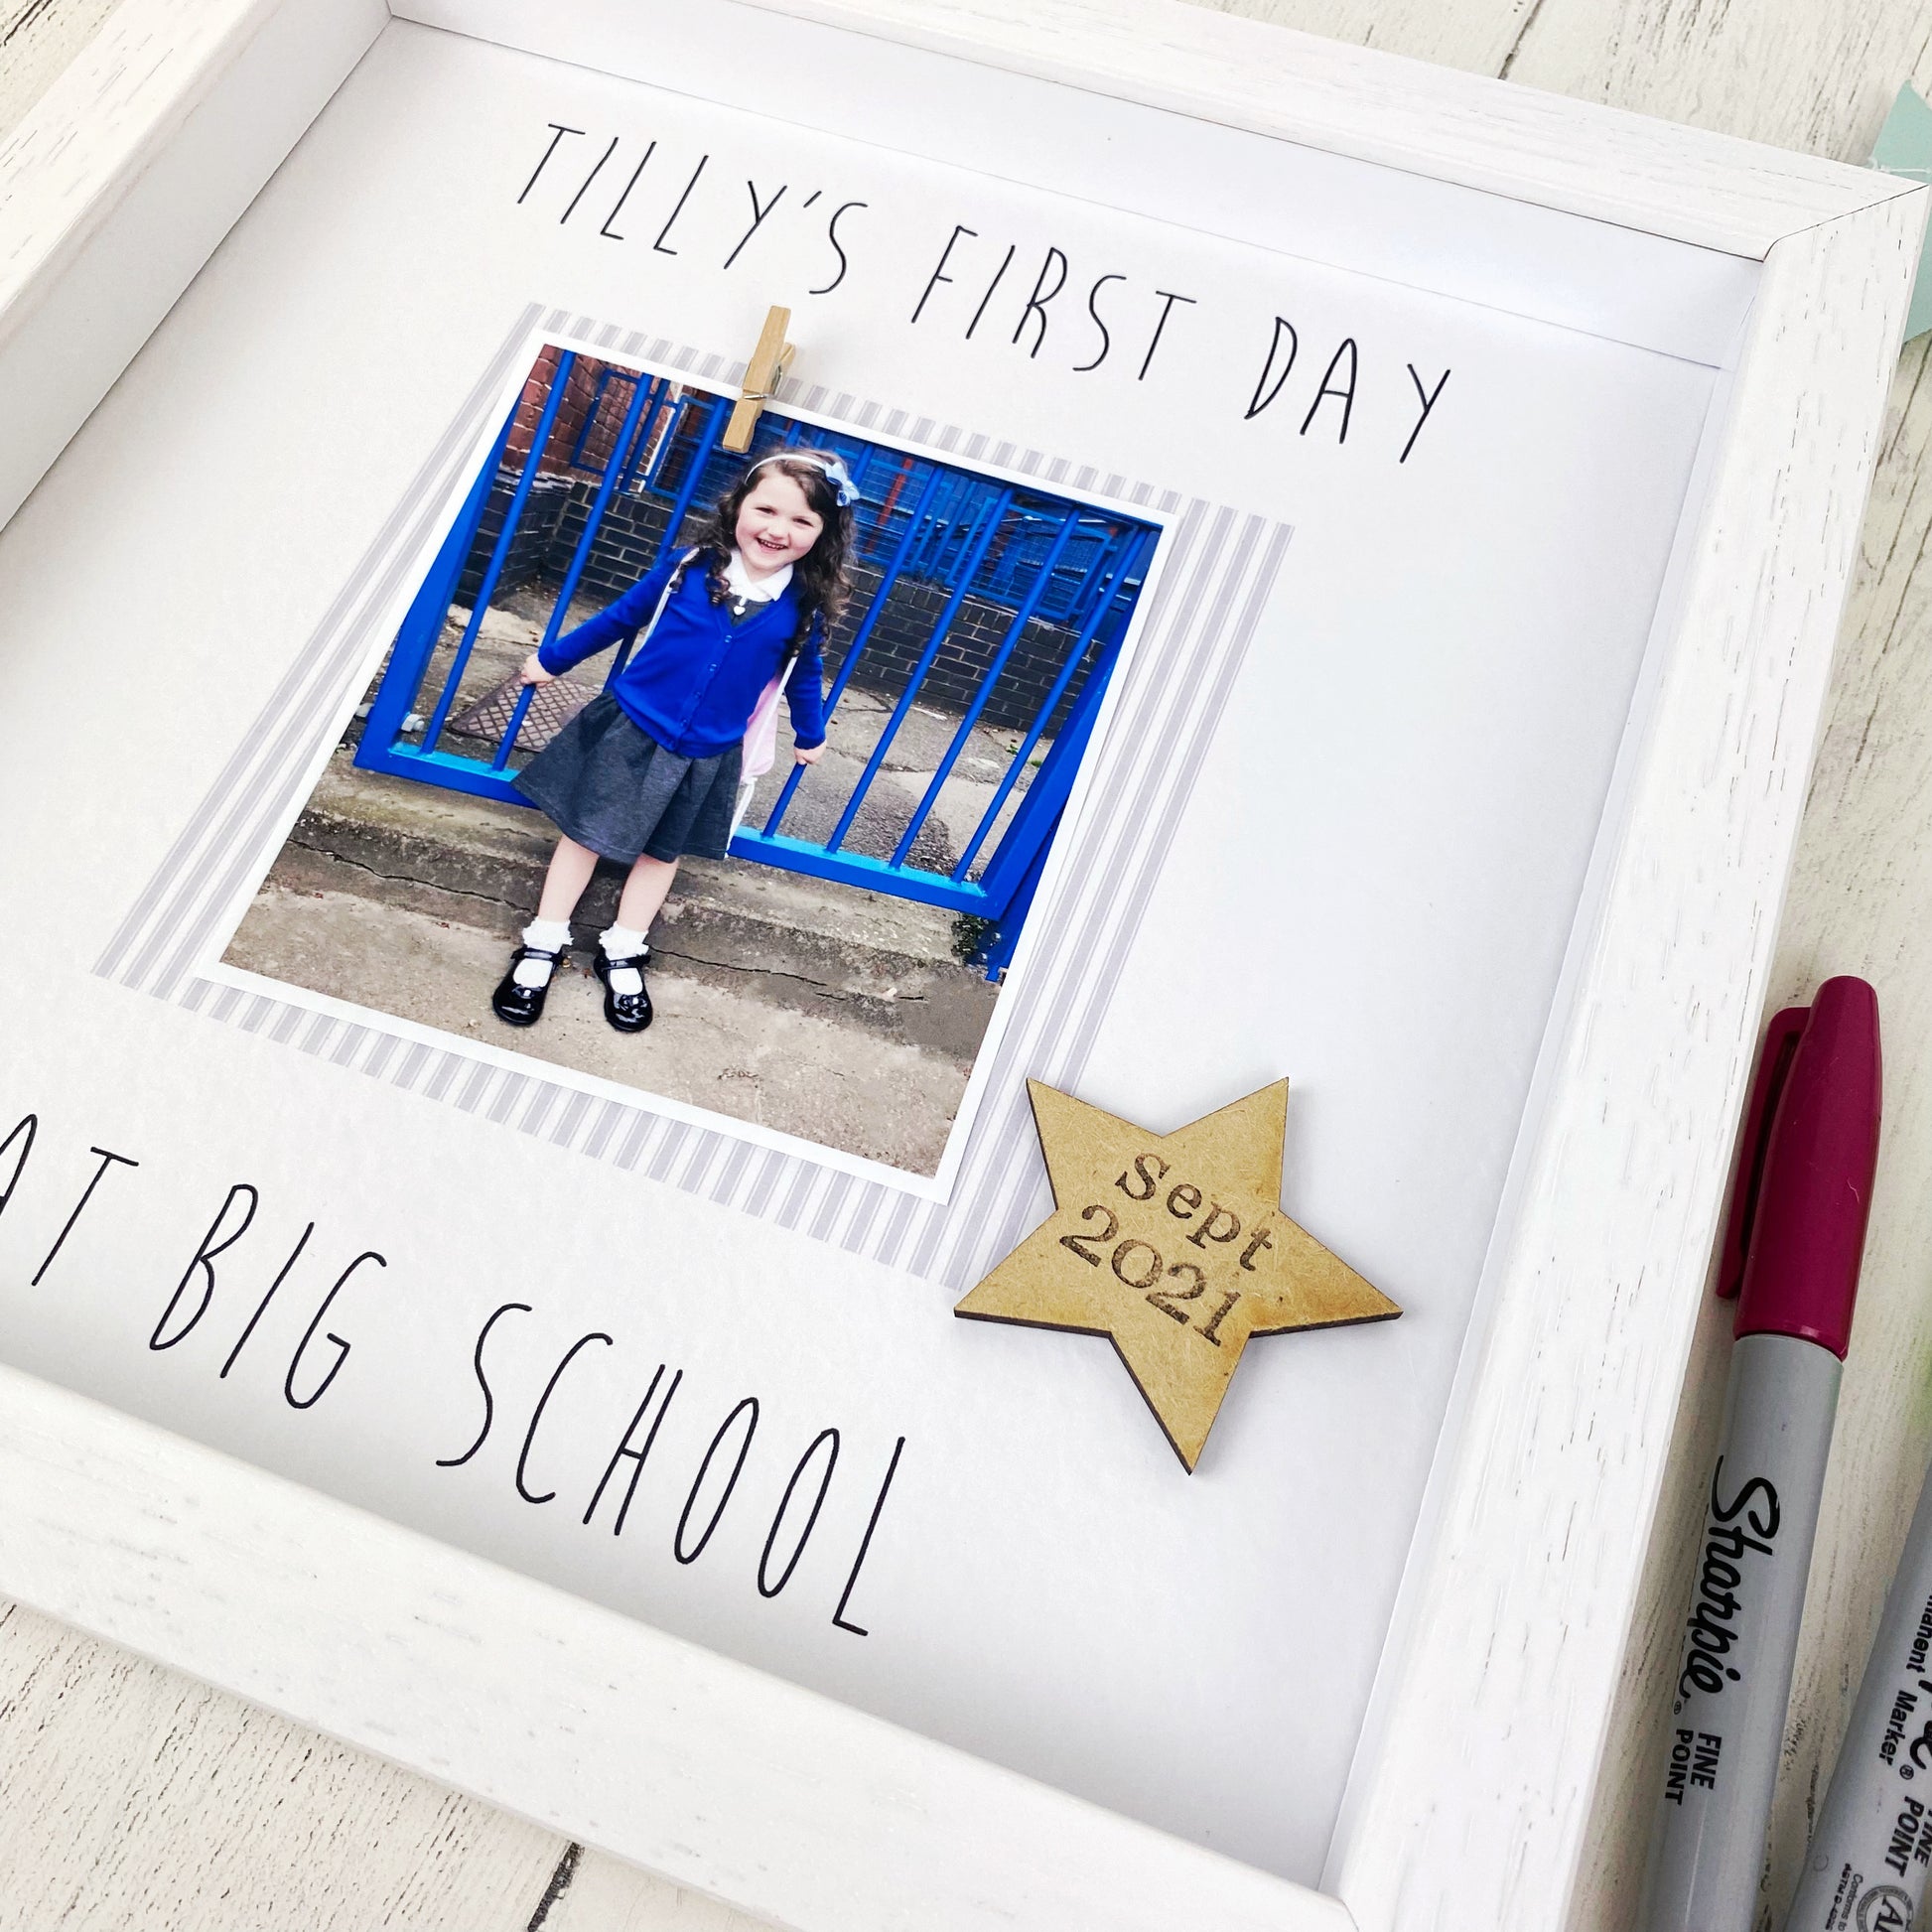 First Day at Big School Photo Frame